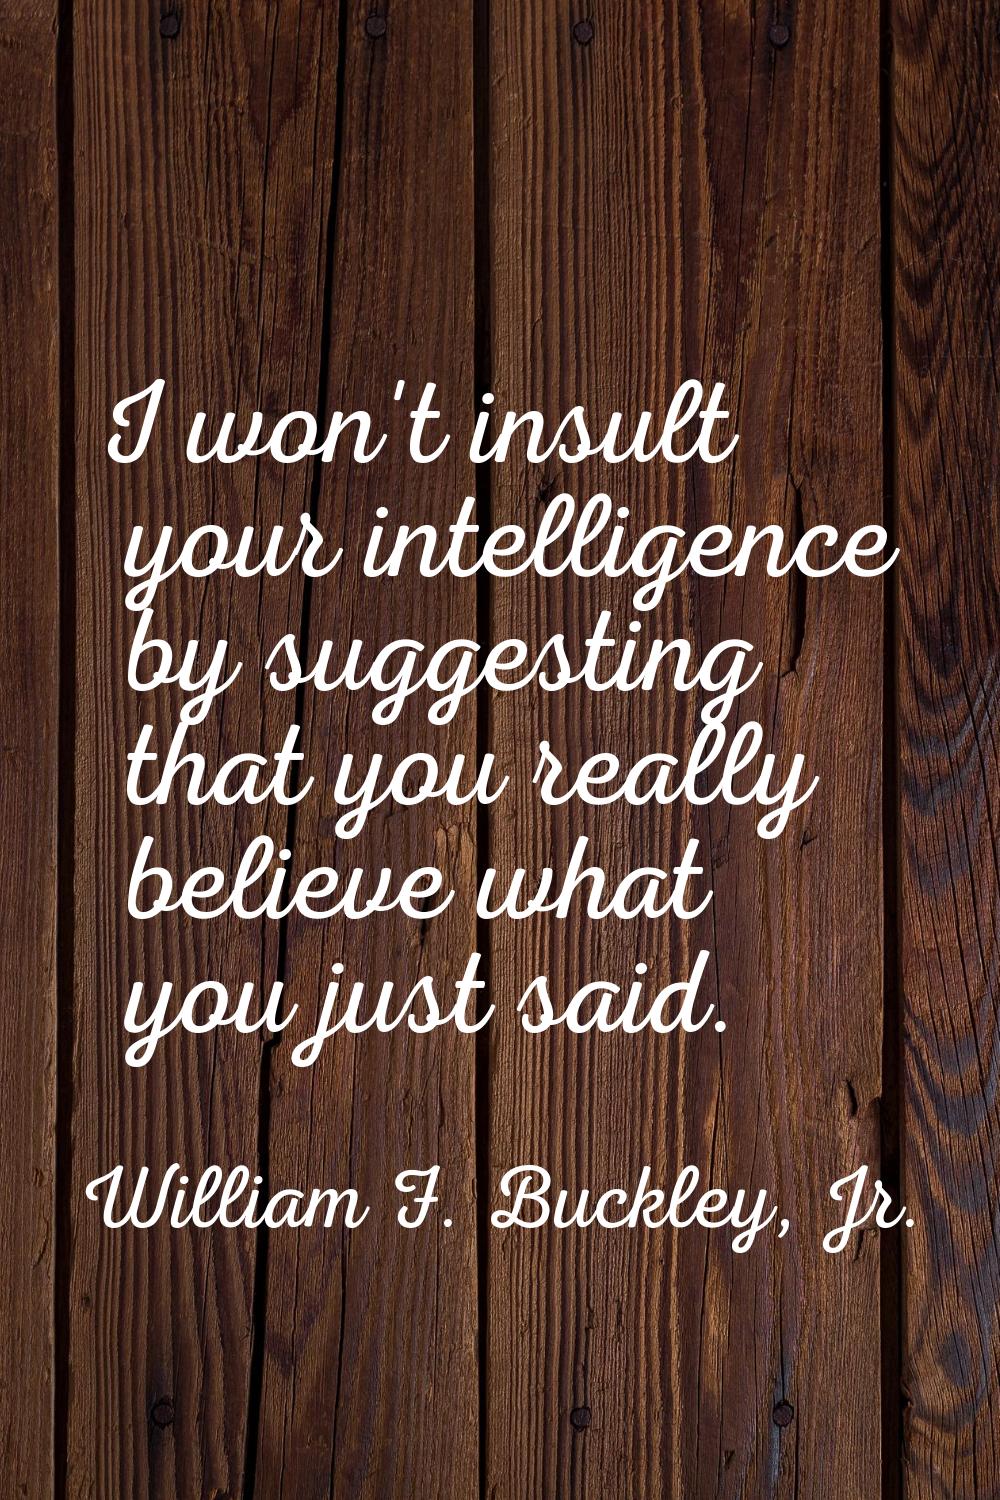 I won't insult your intelligence by suggesting that you really believe what you just said.